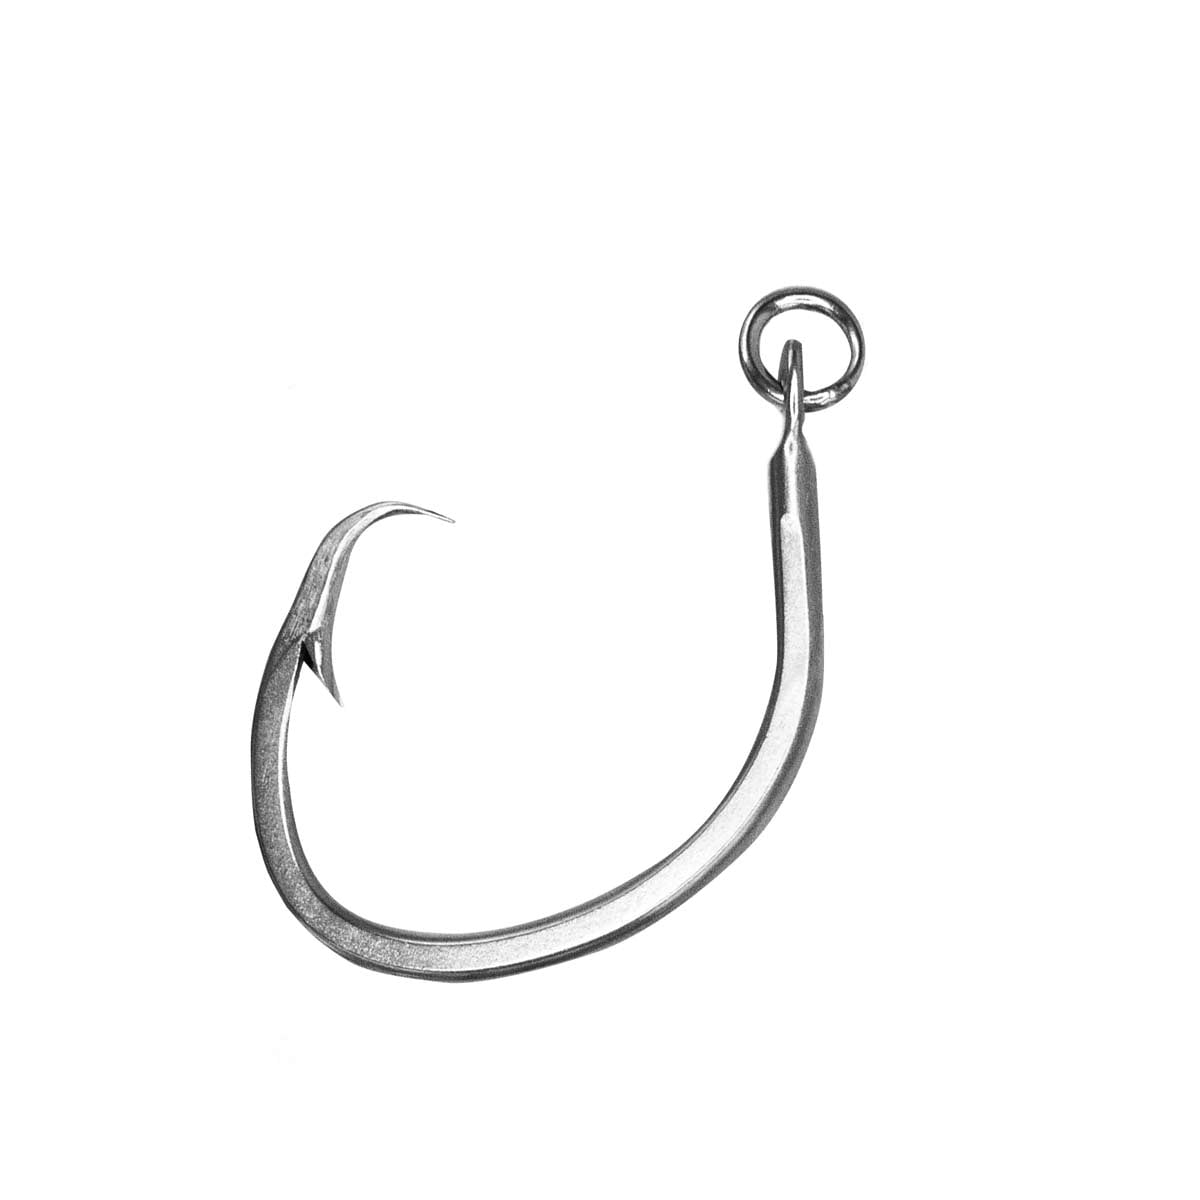 Details about   10PCS Spring Fishing Hooks  Carbon Steel Fishing Hook Terminal Tackle Acces 